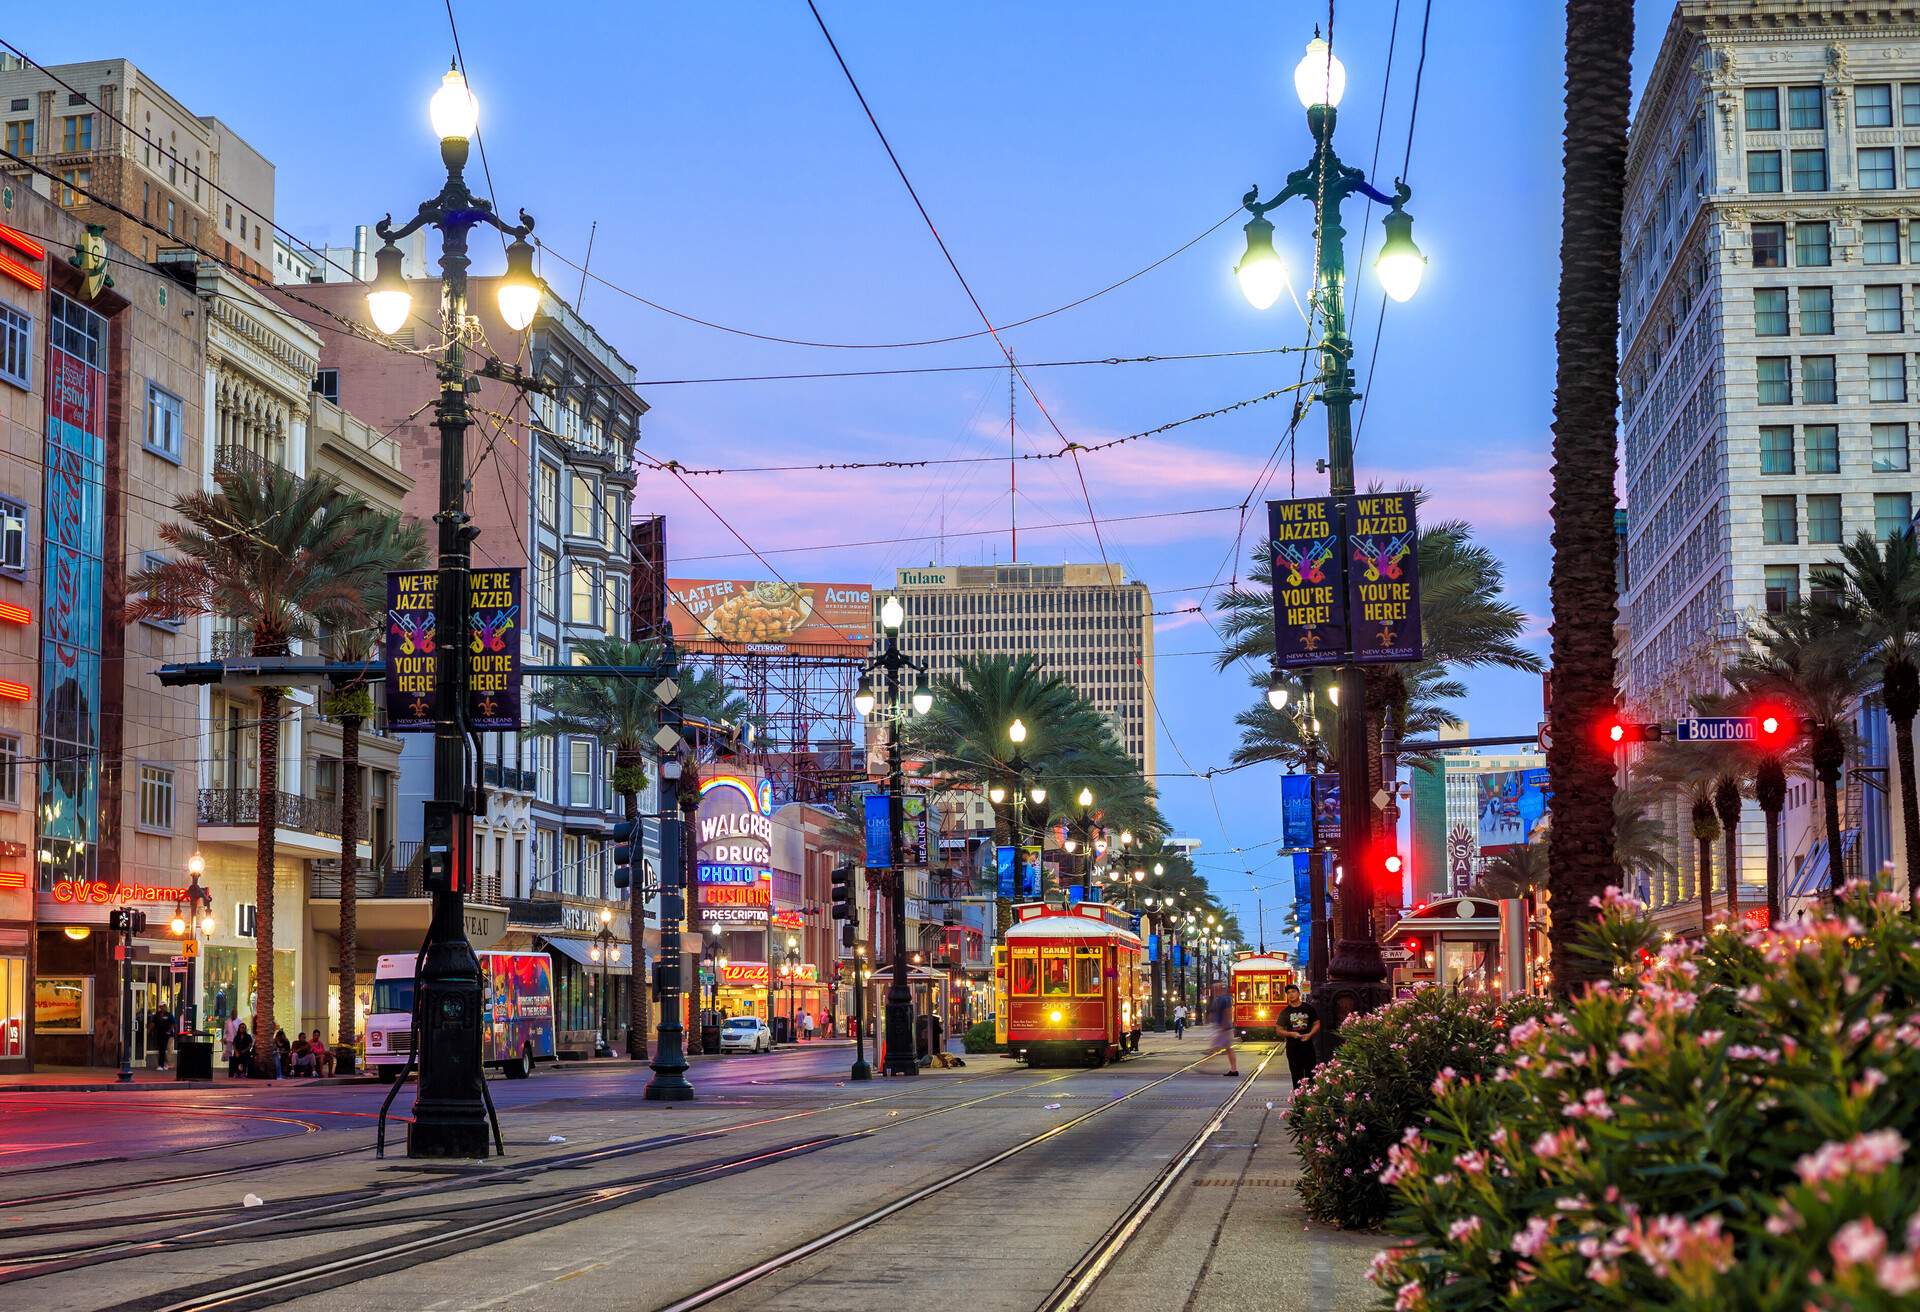 NEW ORLEANS, USA - AUGUST 22: New Orleans Streetcar Line at downtown New Orleans on August 22, 2015. The New Orleans Streetcar line began electric operation in 1893.